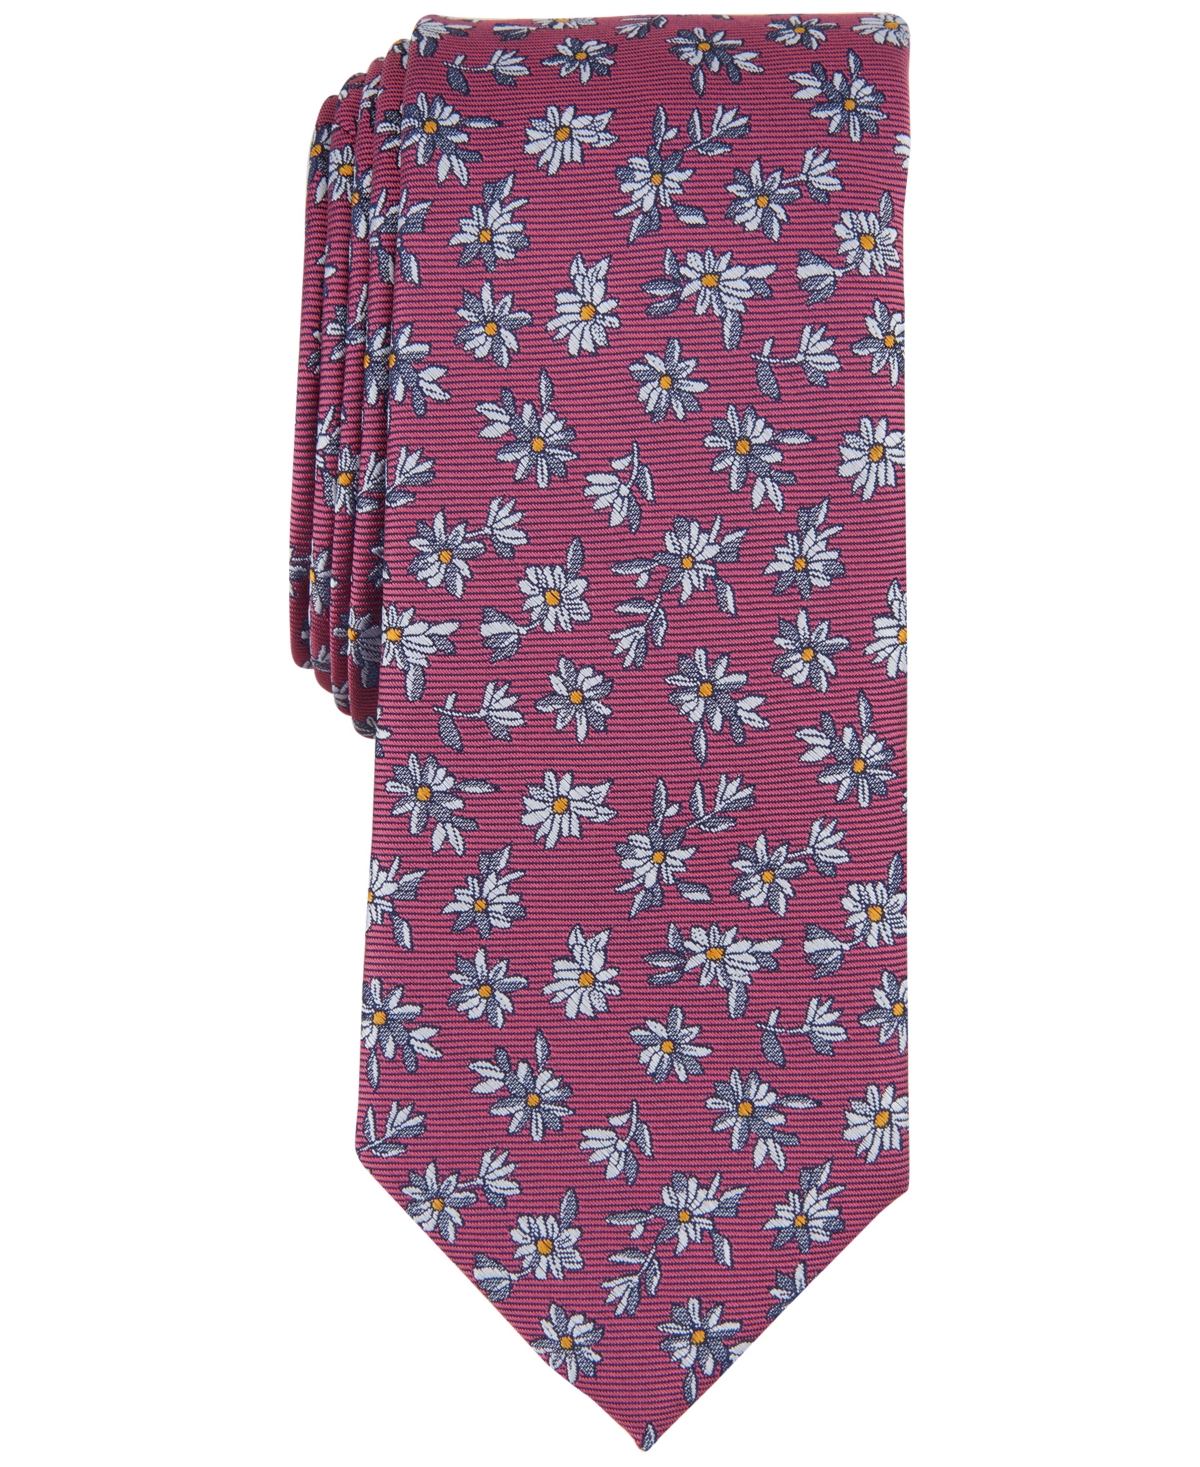 Men's Cesar Floral Tie, Created for Macy's - Coral